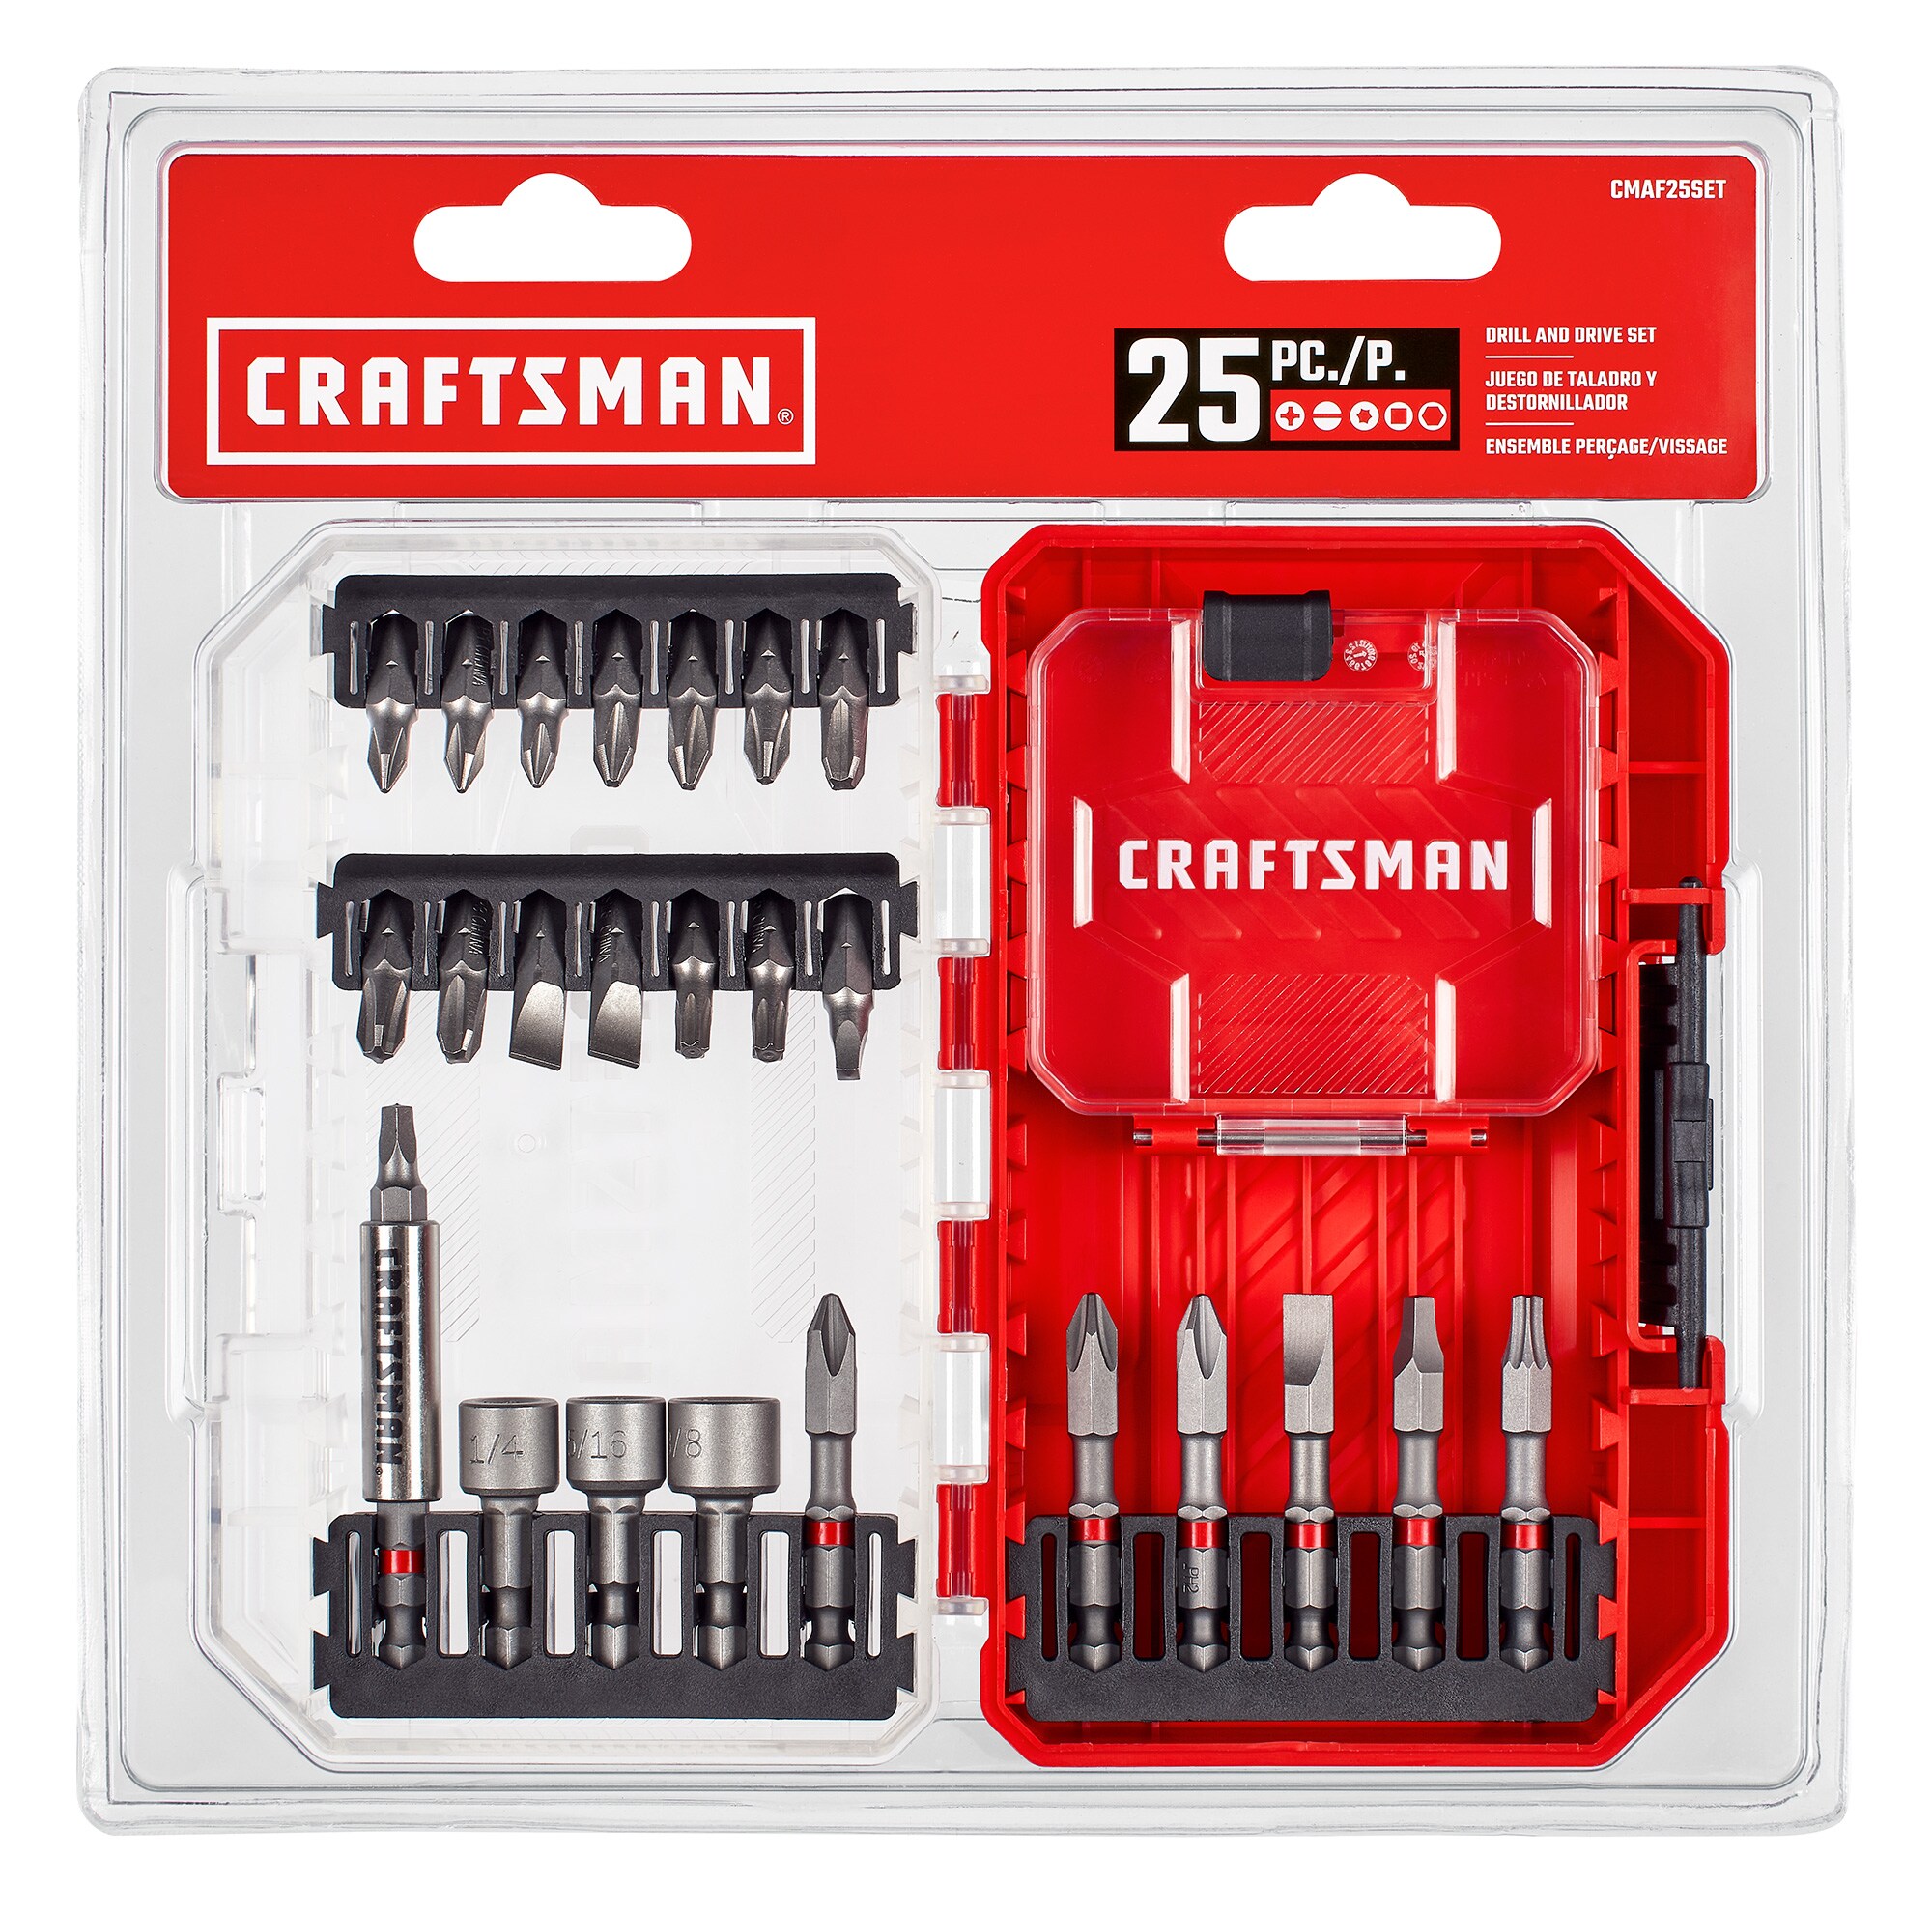 Craftsman T-handle Screwdriver 47135 With Double Sided Bit for sale online 